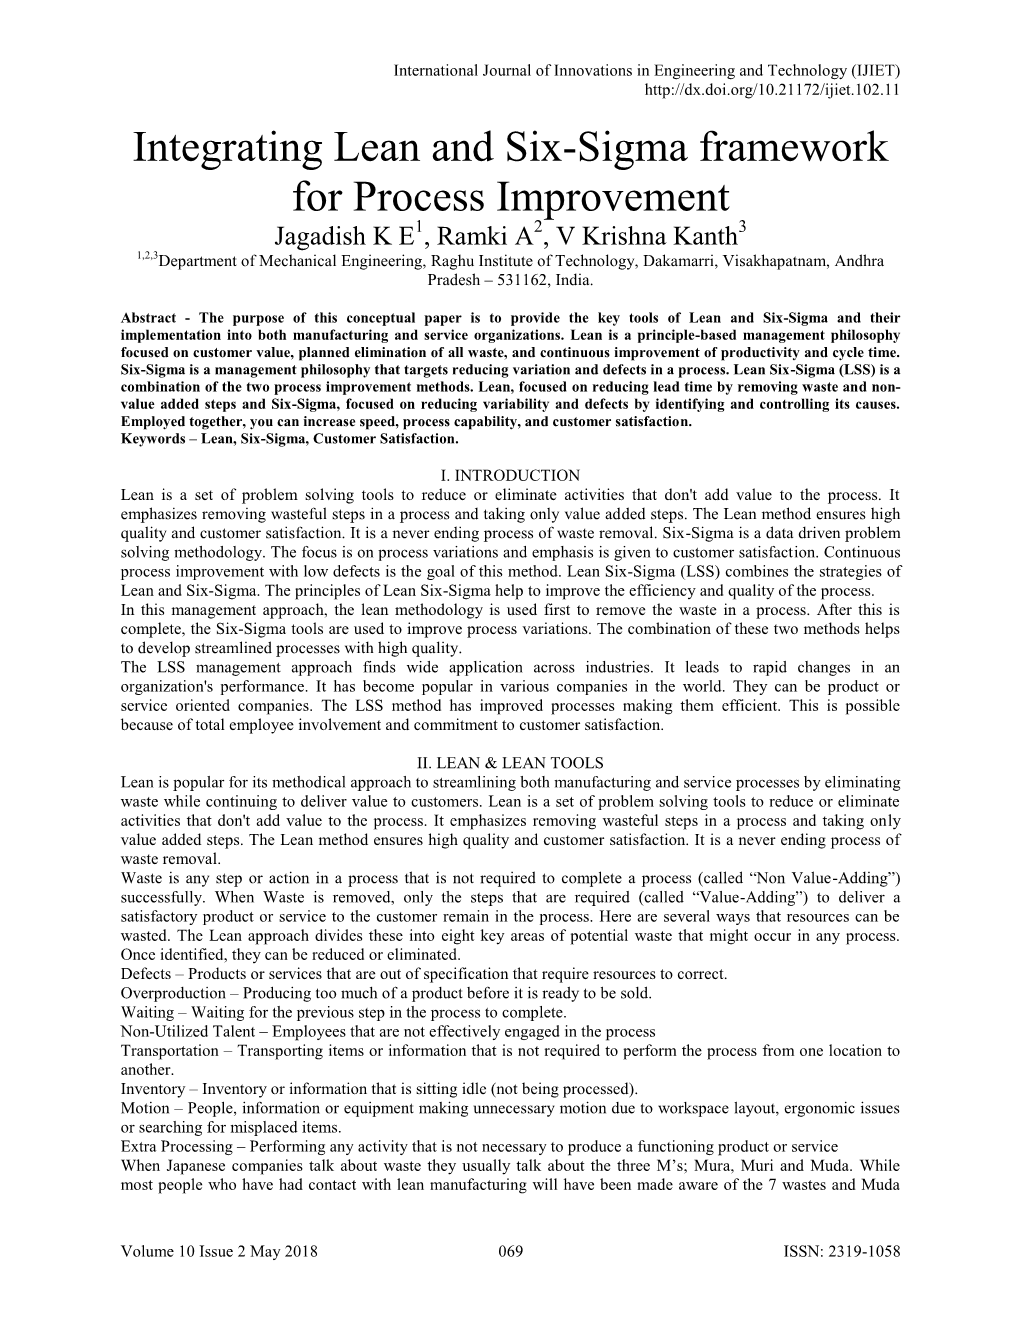 Integrating Lean and Six-Sigma Framework for Process Improvement